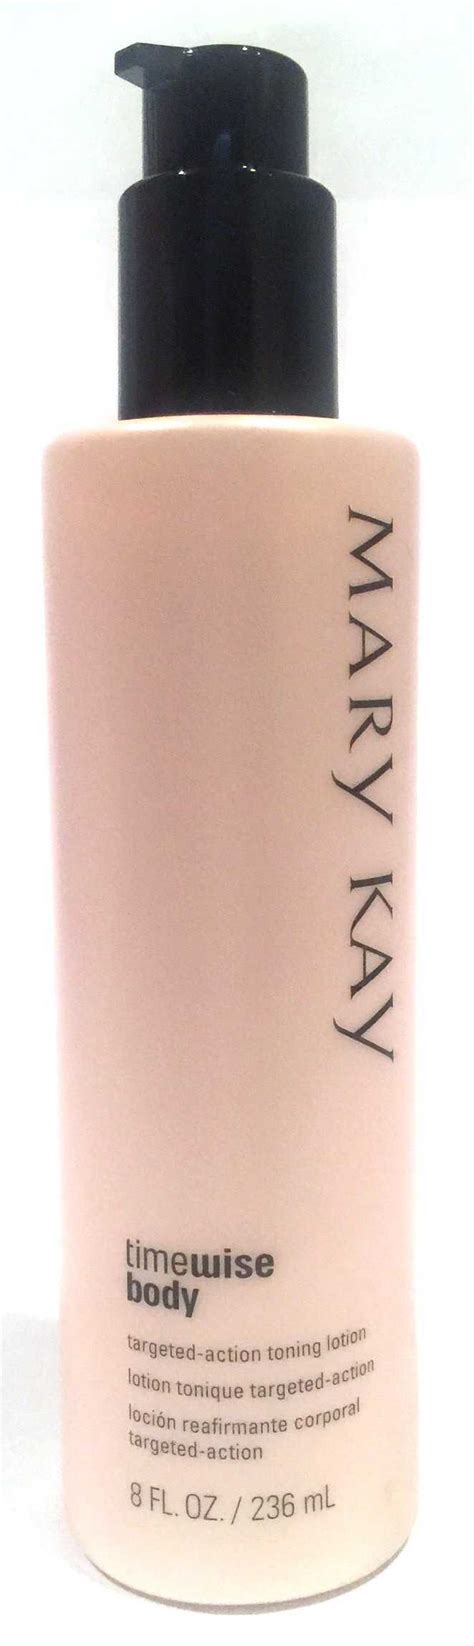 Use replenishing serum + c to tone your skin on your face. Mary Kay Skin Care :: Timewise :: Targeted Action Toning ...